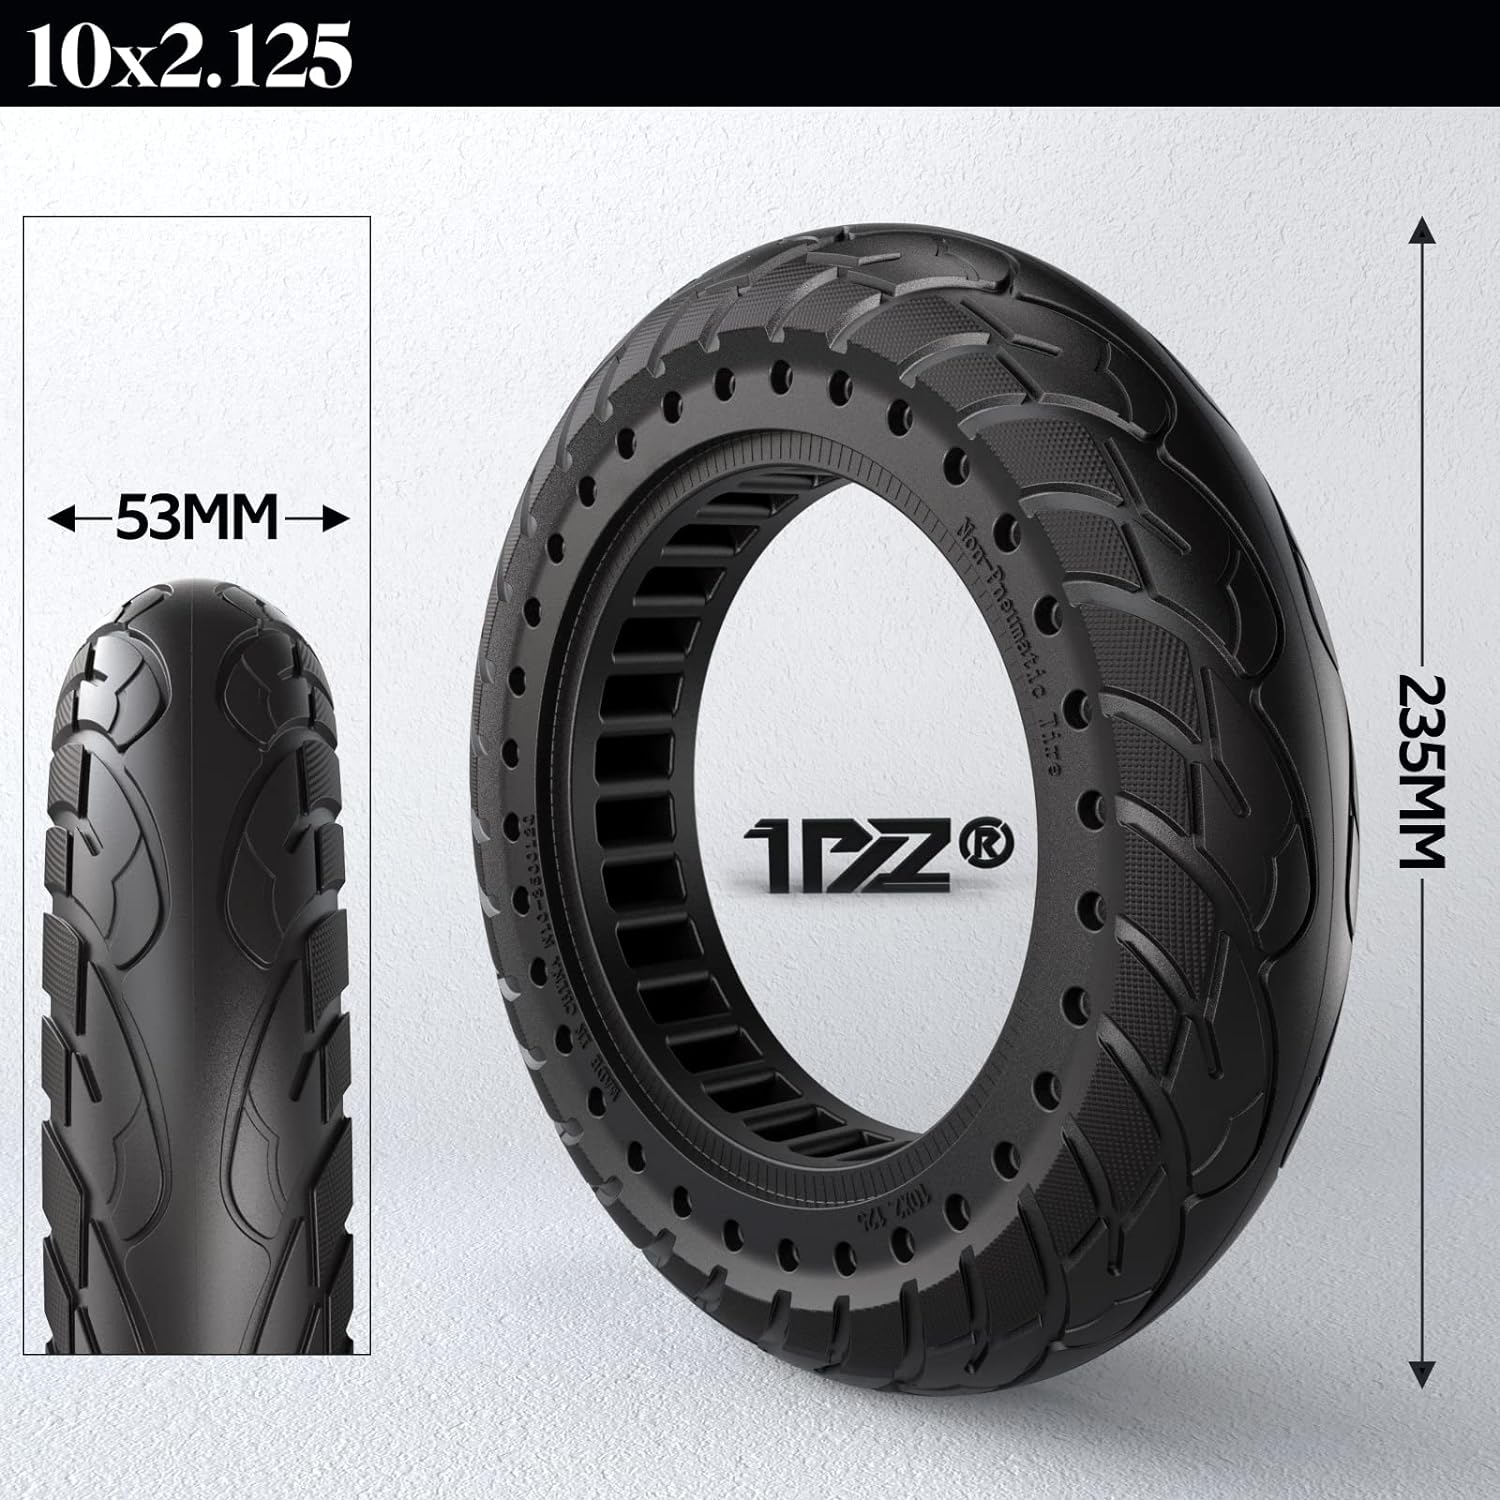 1PZ 10x2.125 Solid Tire Replacement for Xiaomi M365 Pro 1S Pro 2 Electric Scooter